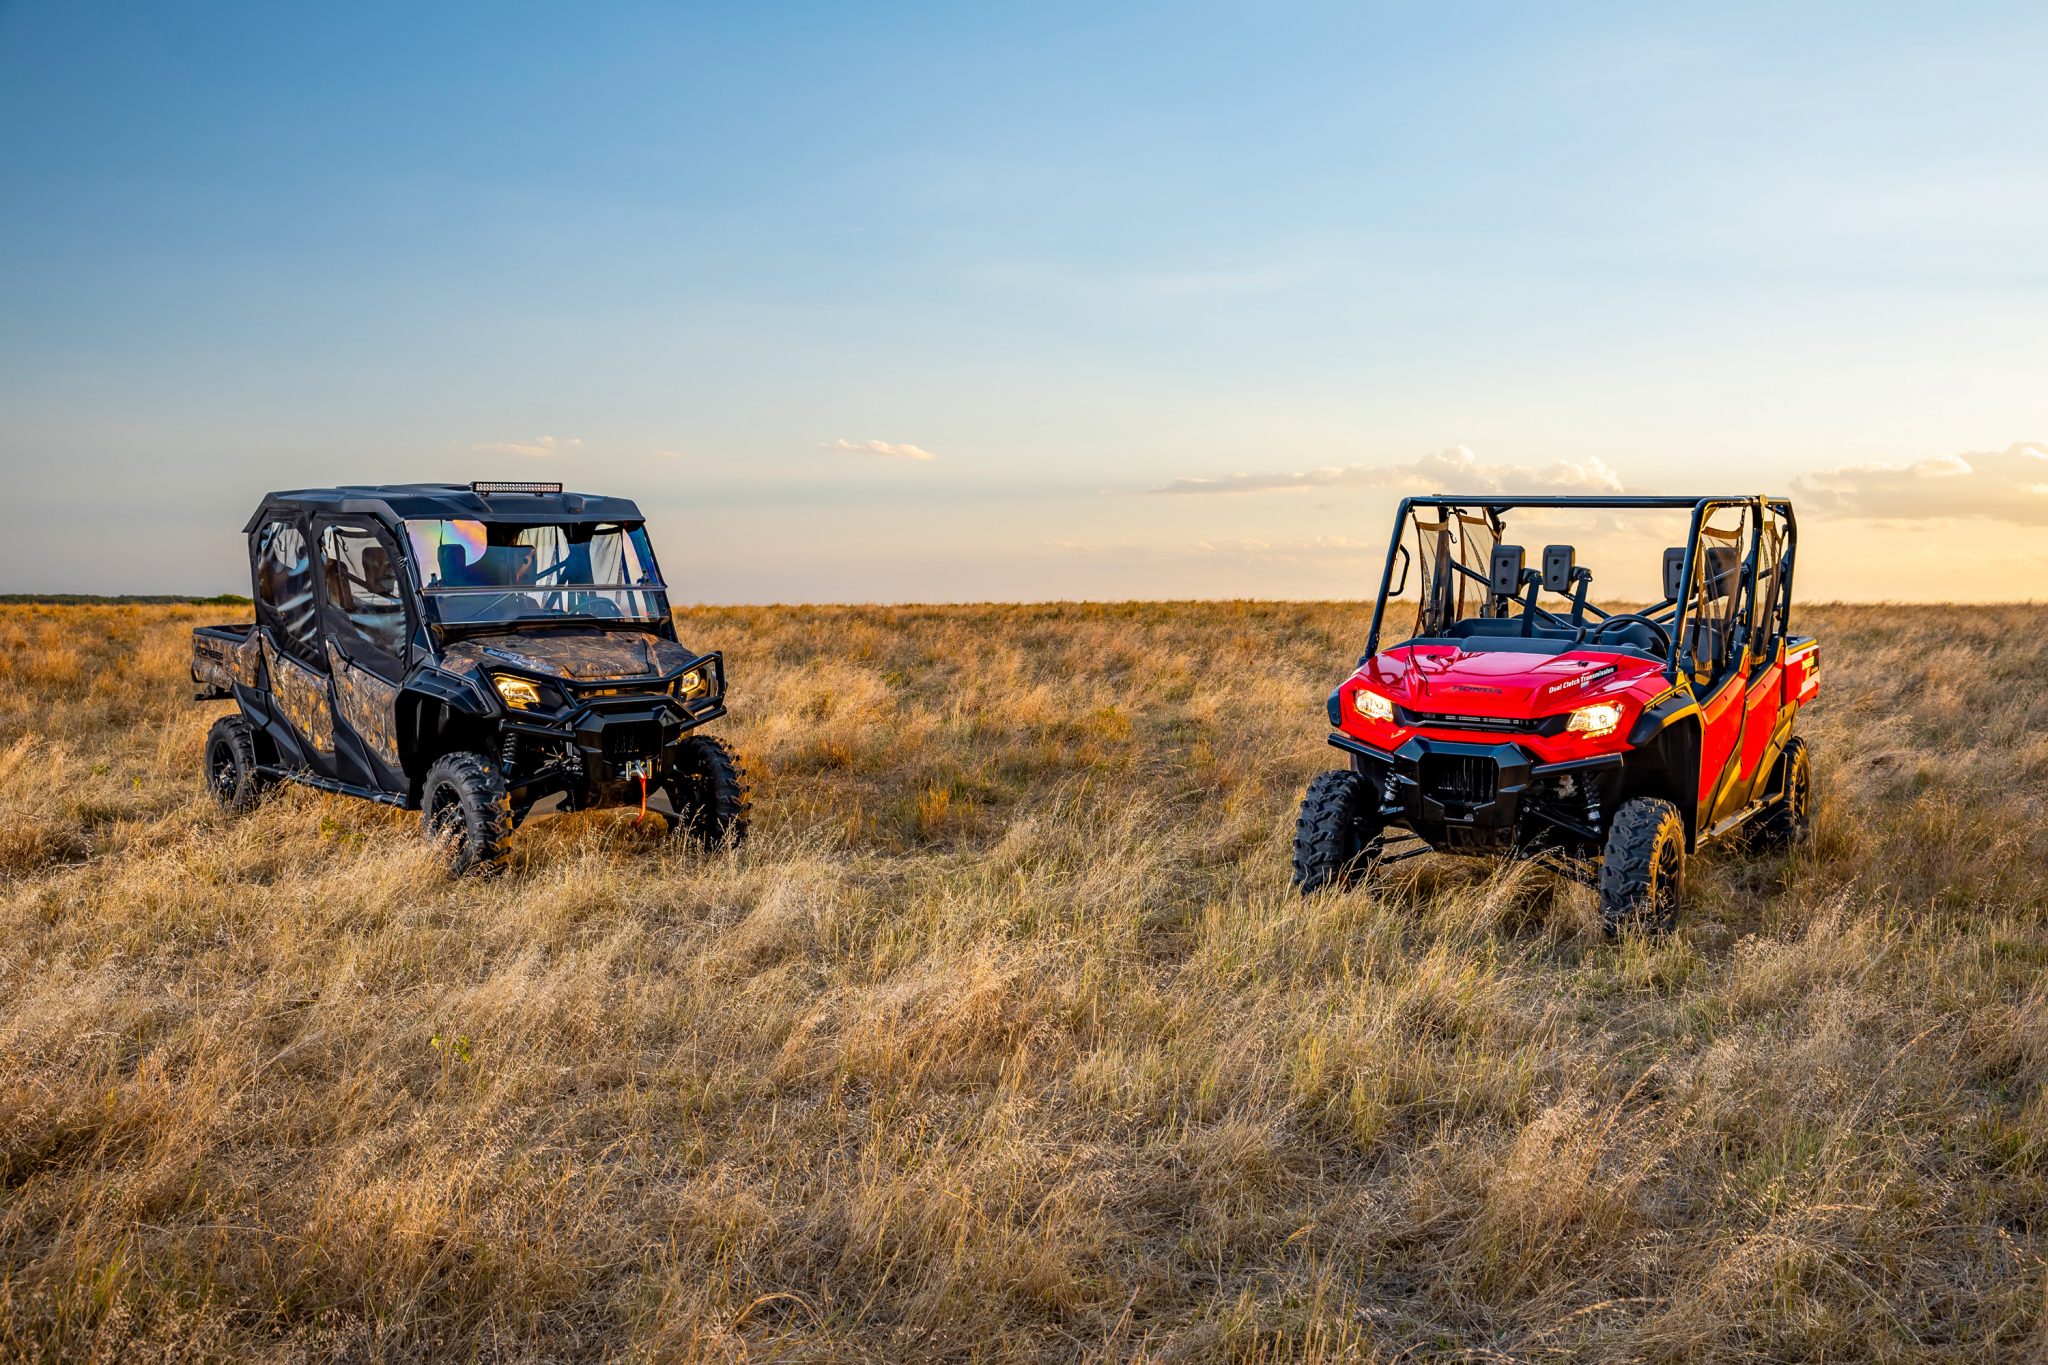 OutdoorHub First Look The New SixSeater Honda Pioneer 10006 Deluxe